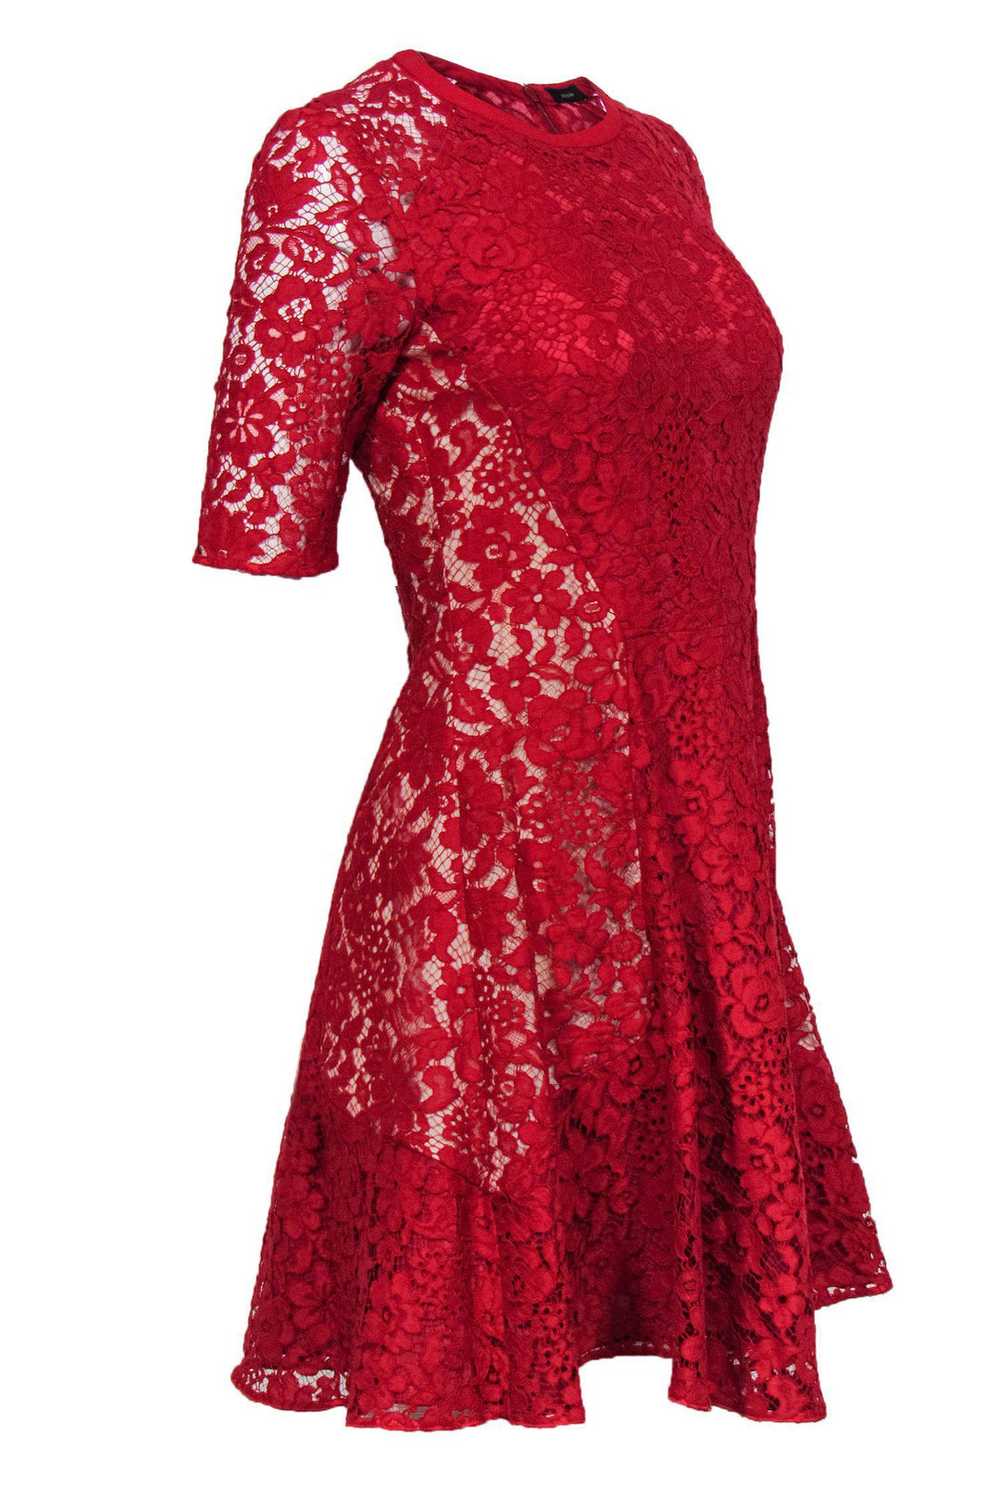 Joseph - Red Lace Cropped Sleeve Cocktail Dress S… - image 2